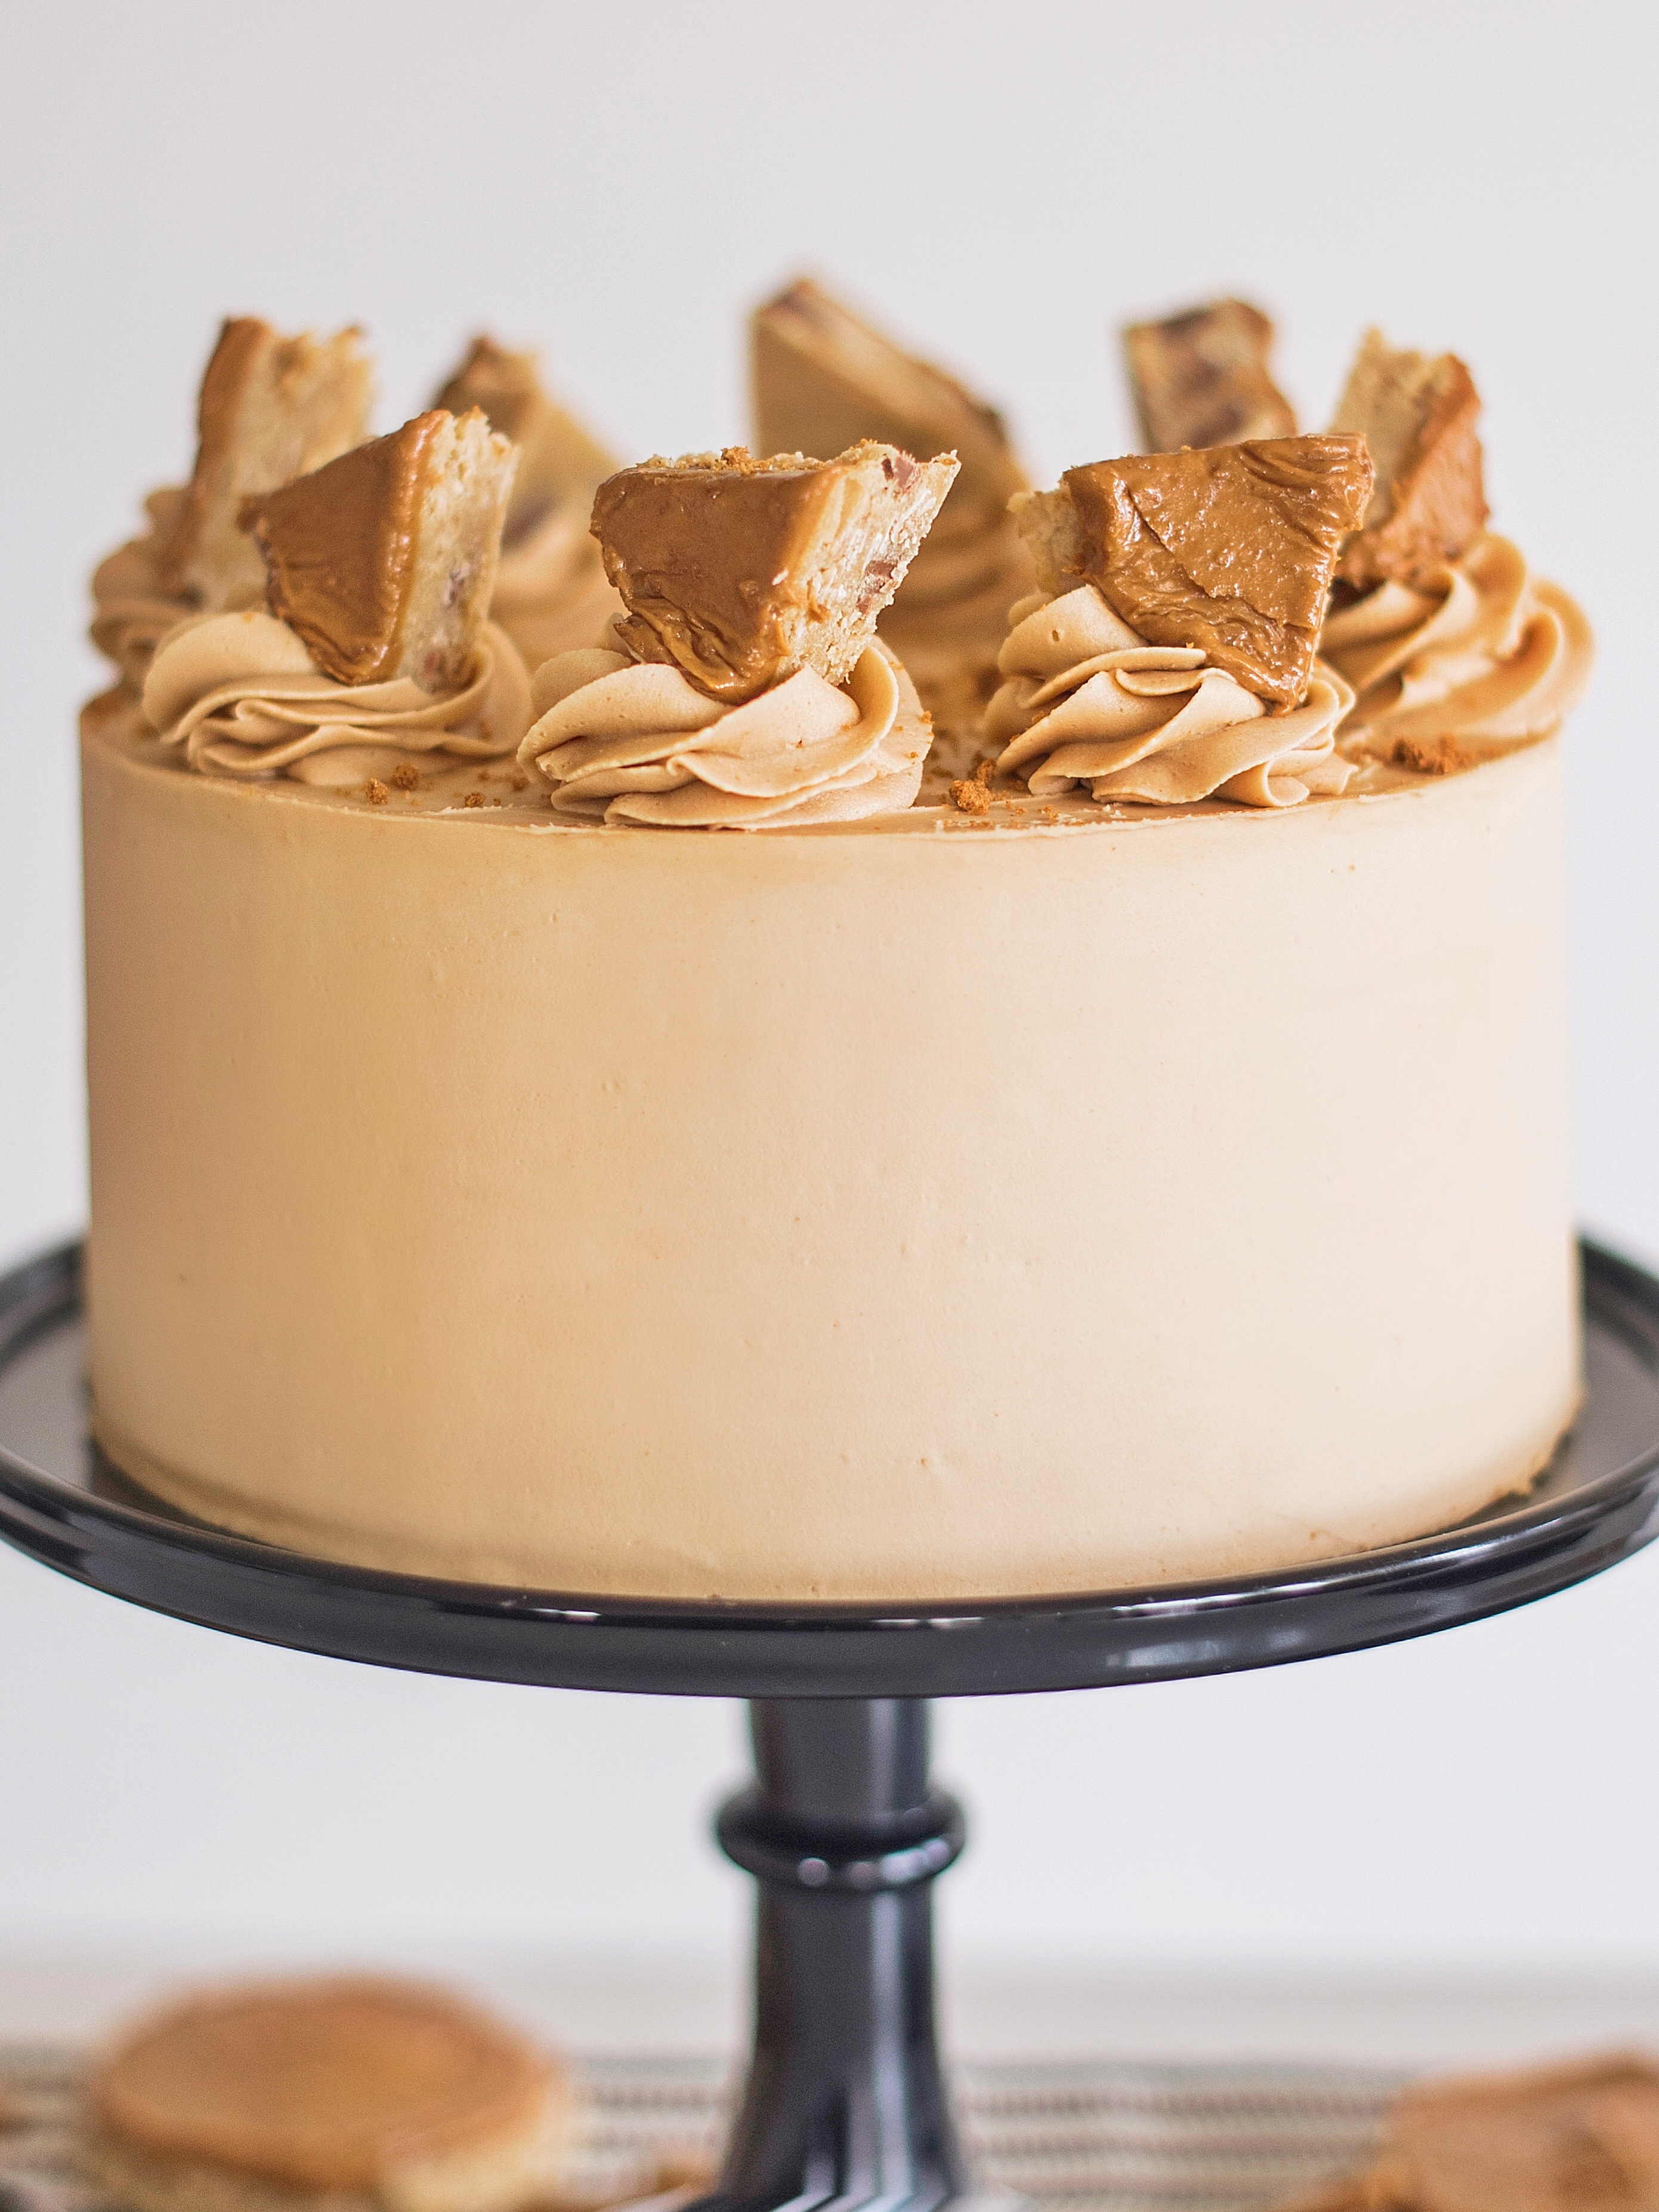 Oatmeal Biscoff Cake: oatmeal chocolate chip cake layers baked on a Biscoff crust, topped with Biscoff spread and Biscoff buttercream. #cakebycourtney #cakerecipe #oatmealcakerecipe #biscoff #cookiebutter #cookiebuttercakerecipe #biscoffbuttercream #cookiebutterbuttercream